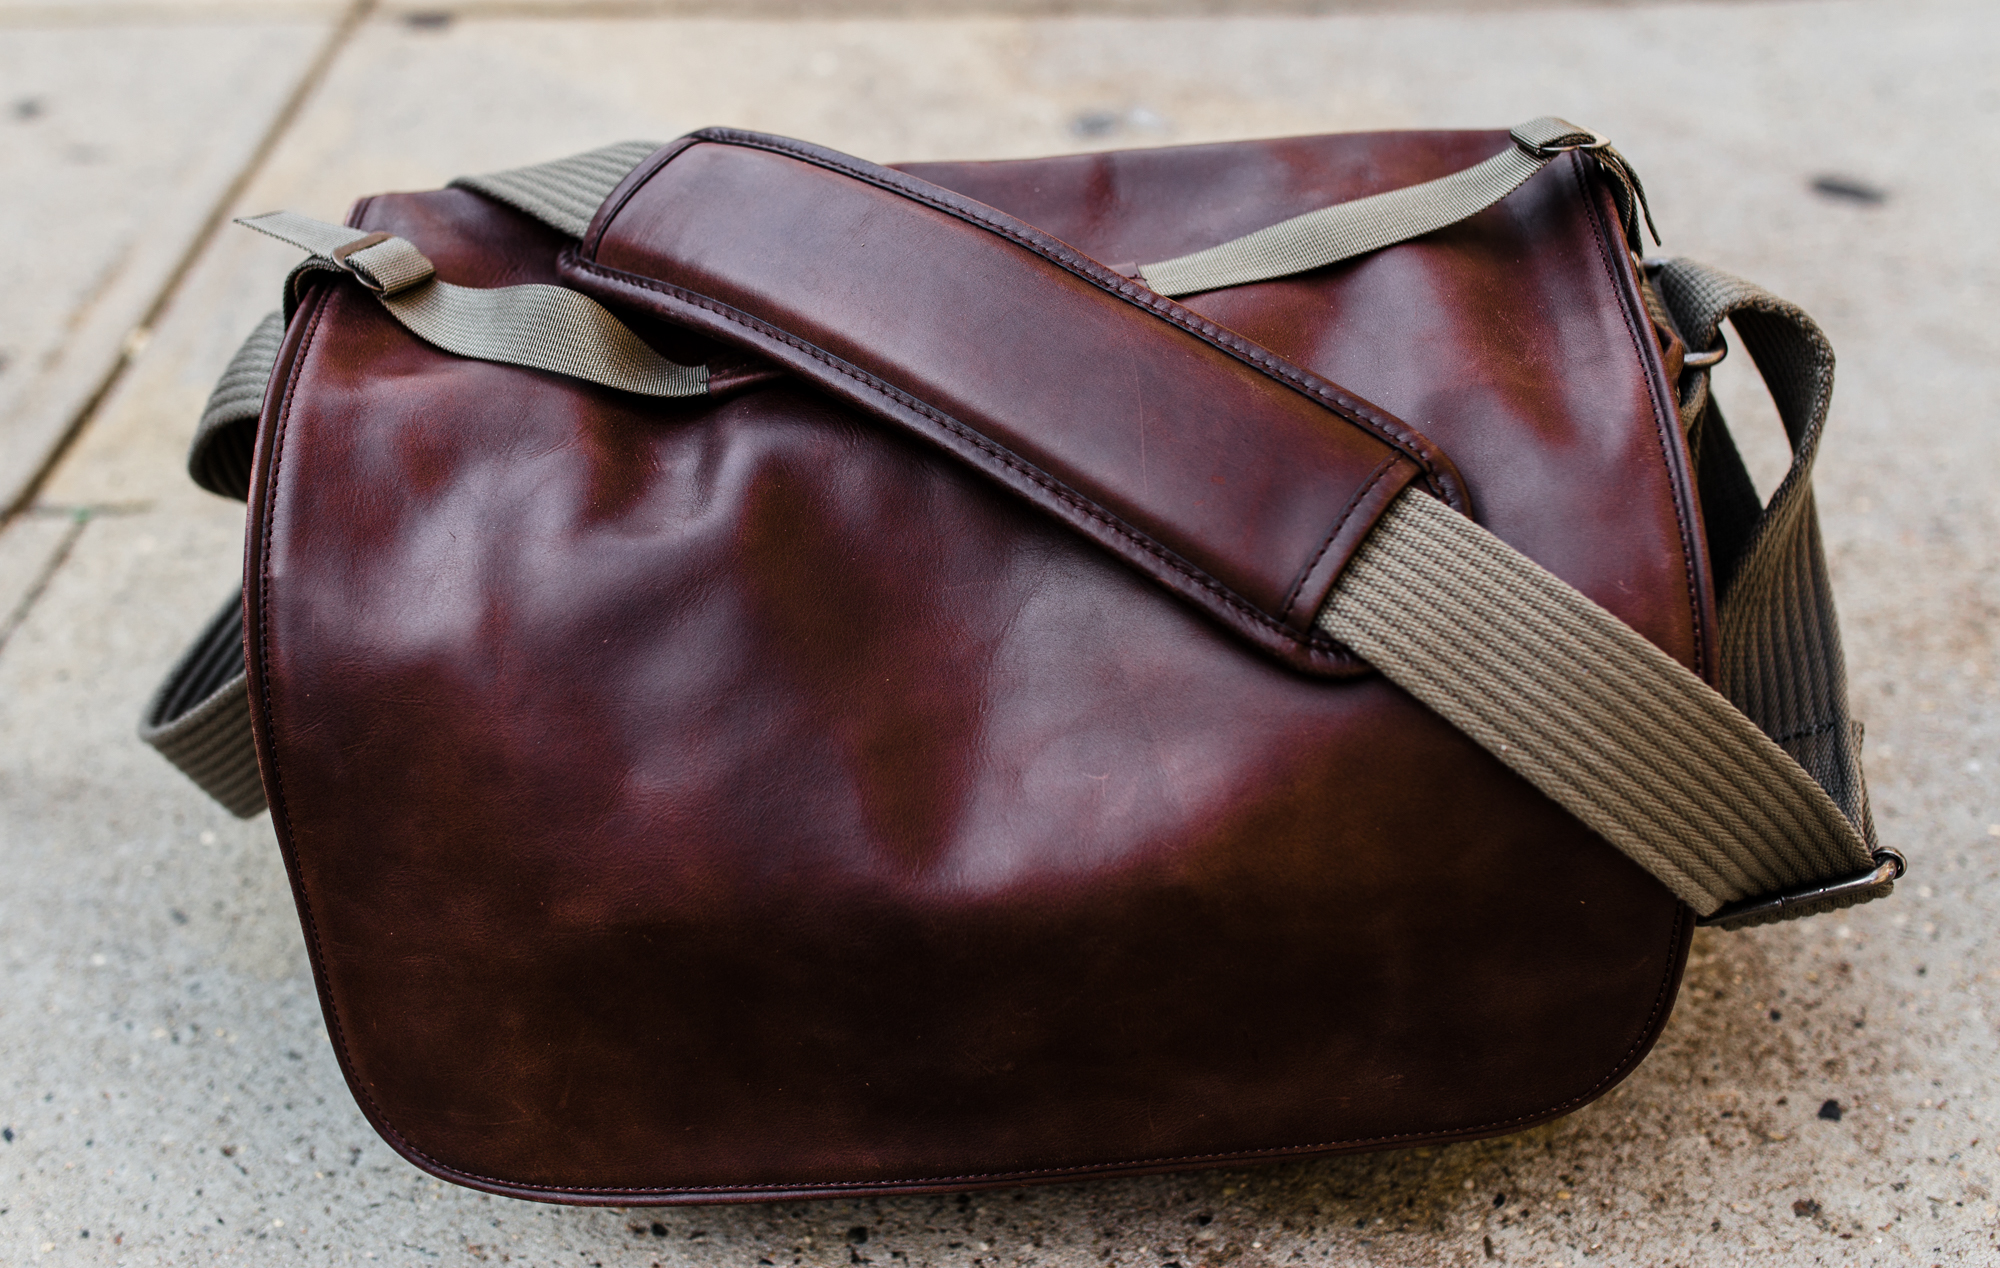 Review: Think Tank Retrospective 30 Leather